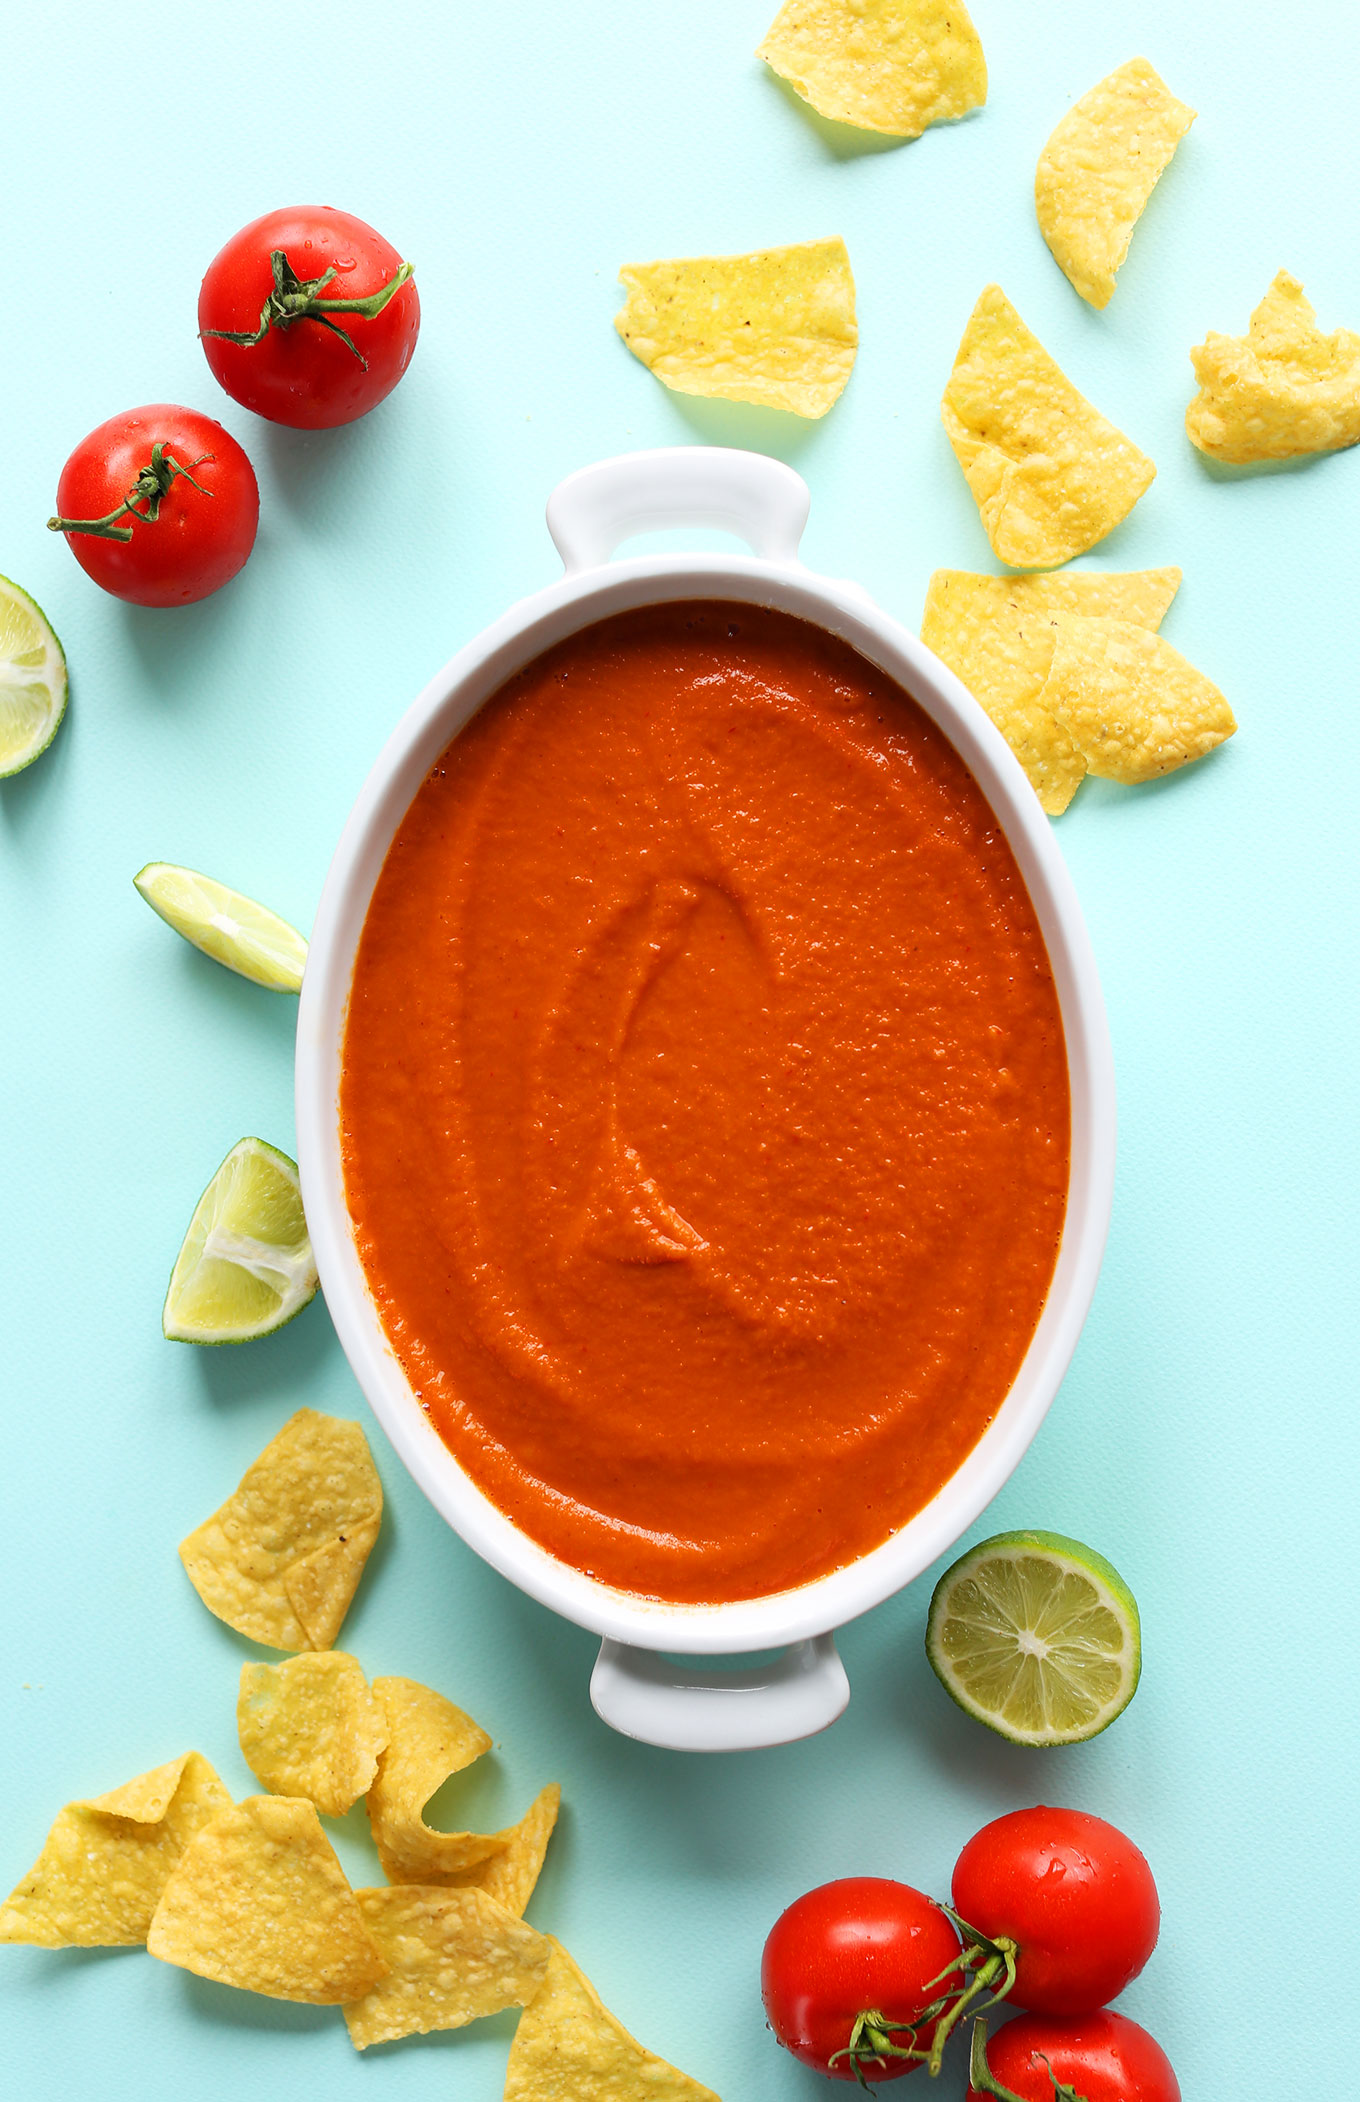 Tortilla chips alongside a dish filled with our Creamy Blended Red Salsa recipe